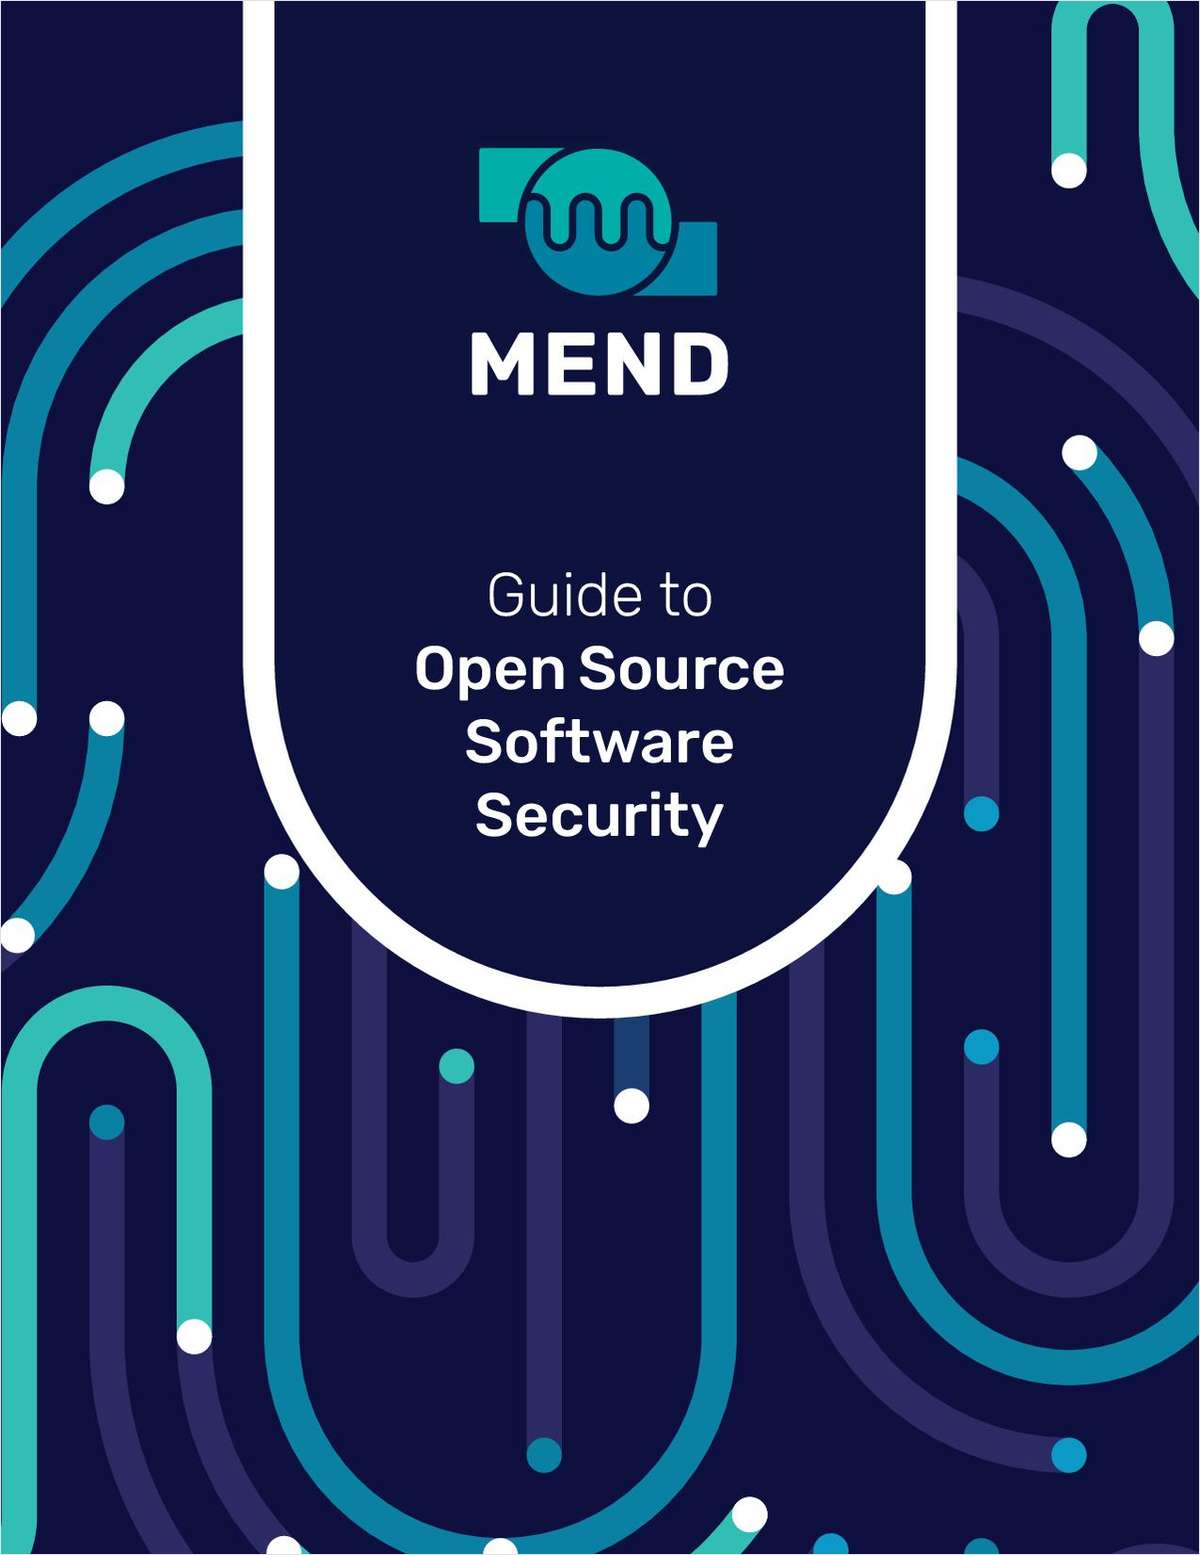 Guide to Open Source Software Security